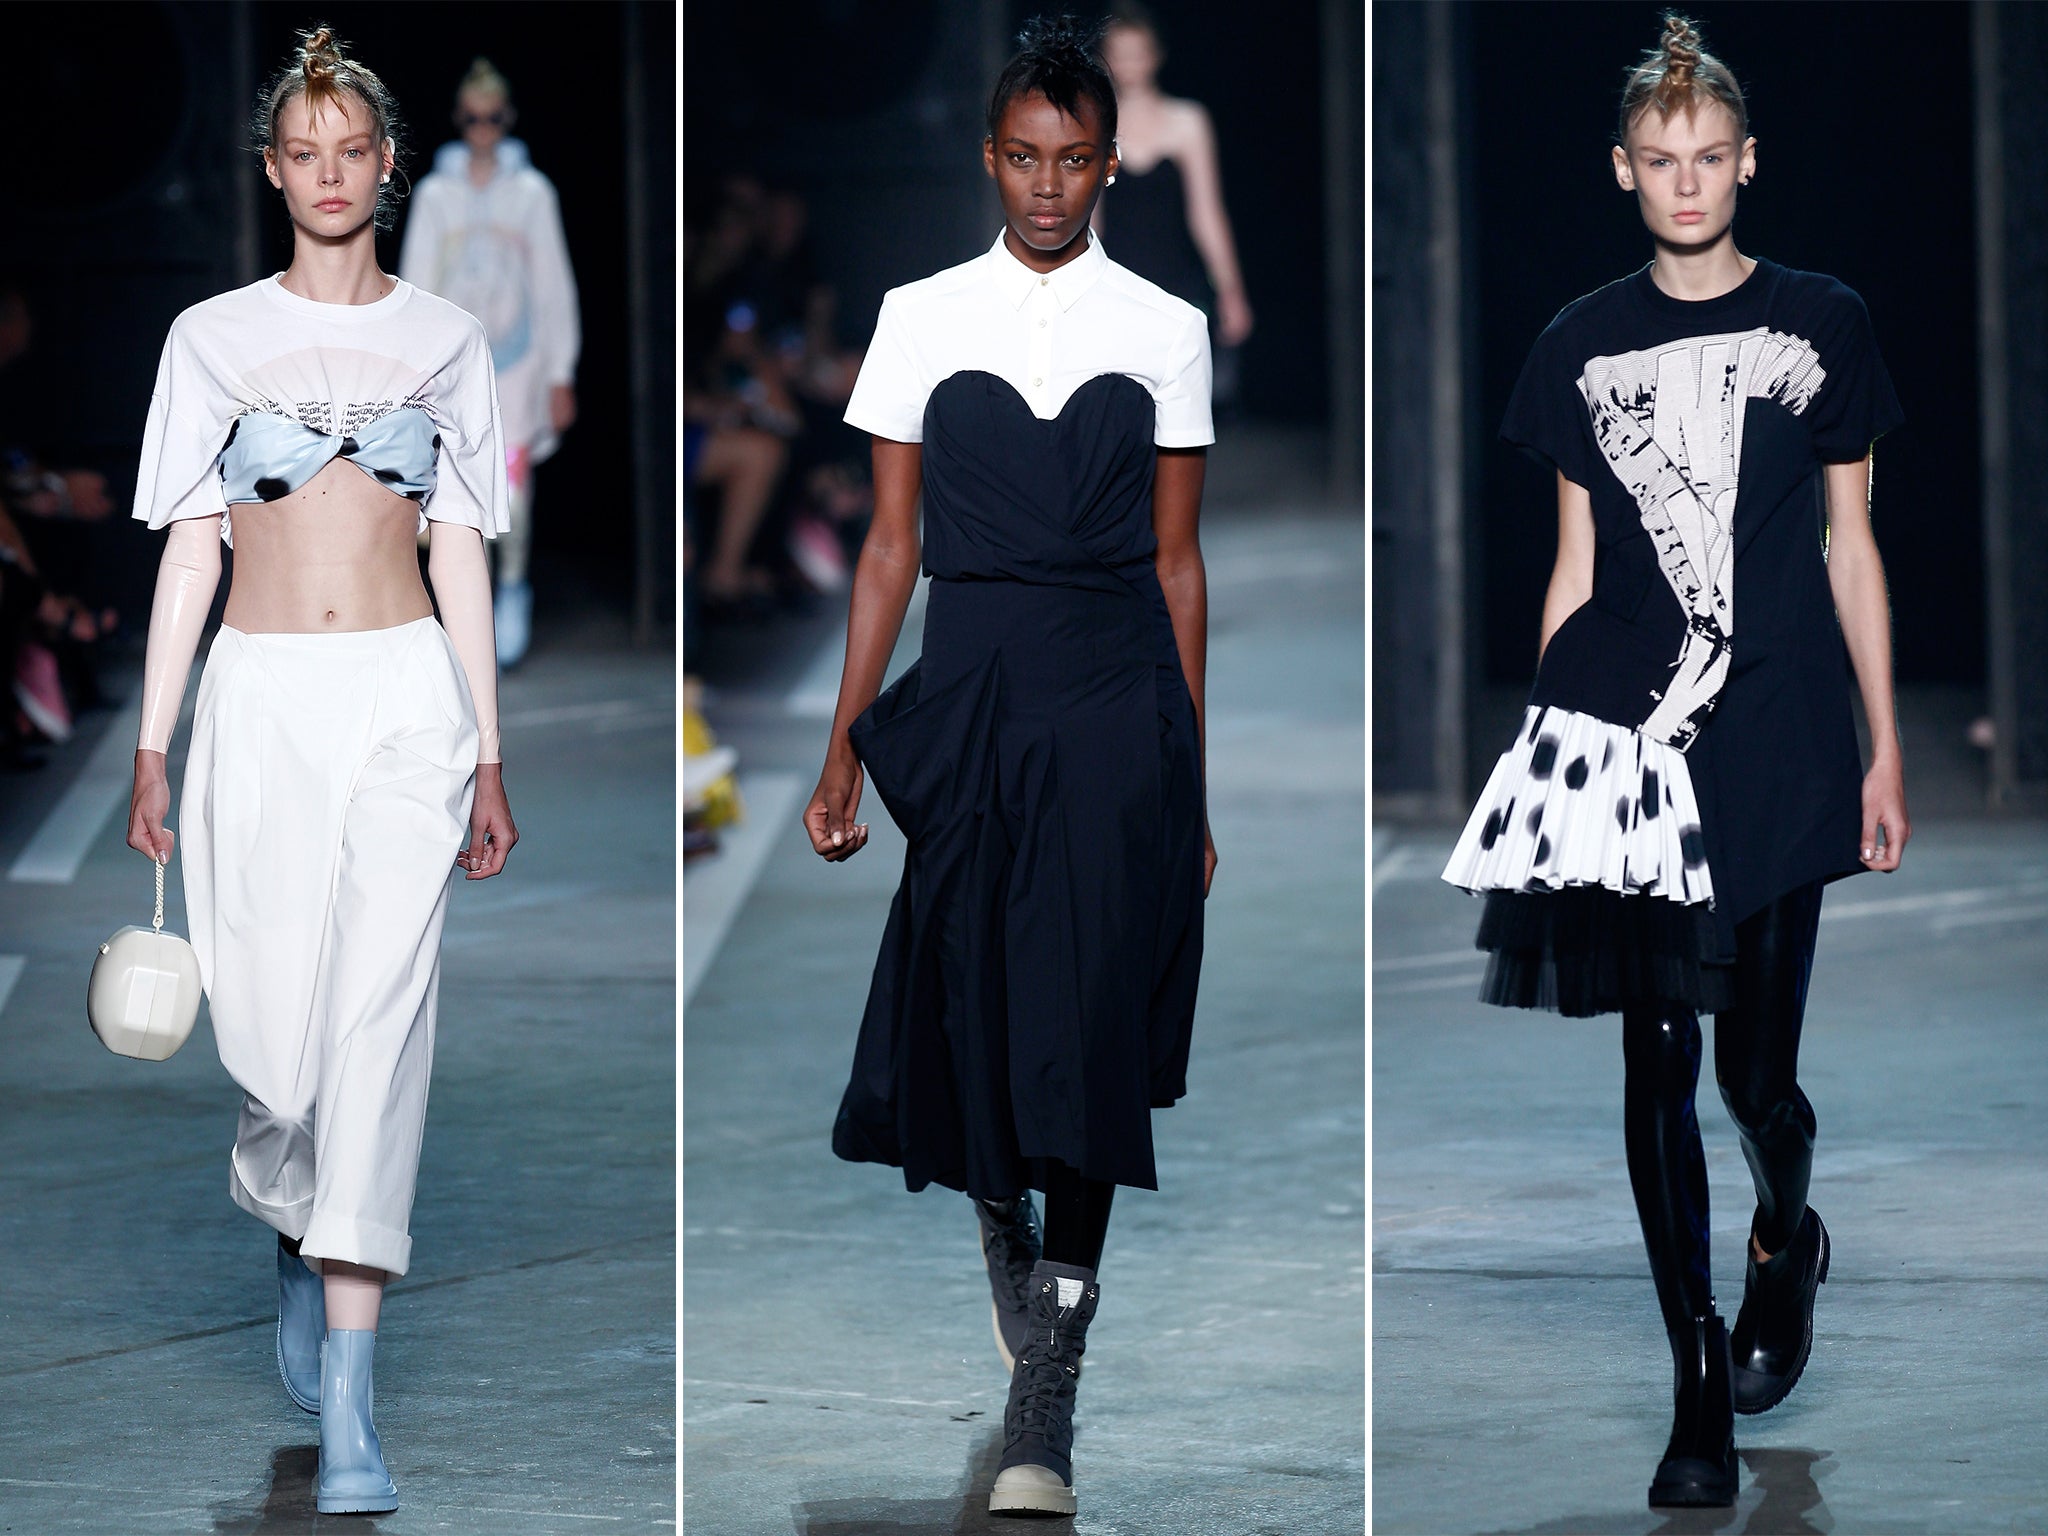 Marc by Marc Jacobs at New York Fashion Week: A punchy fusion of